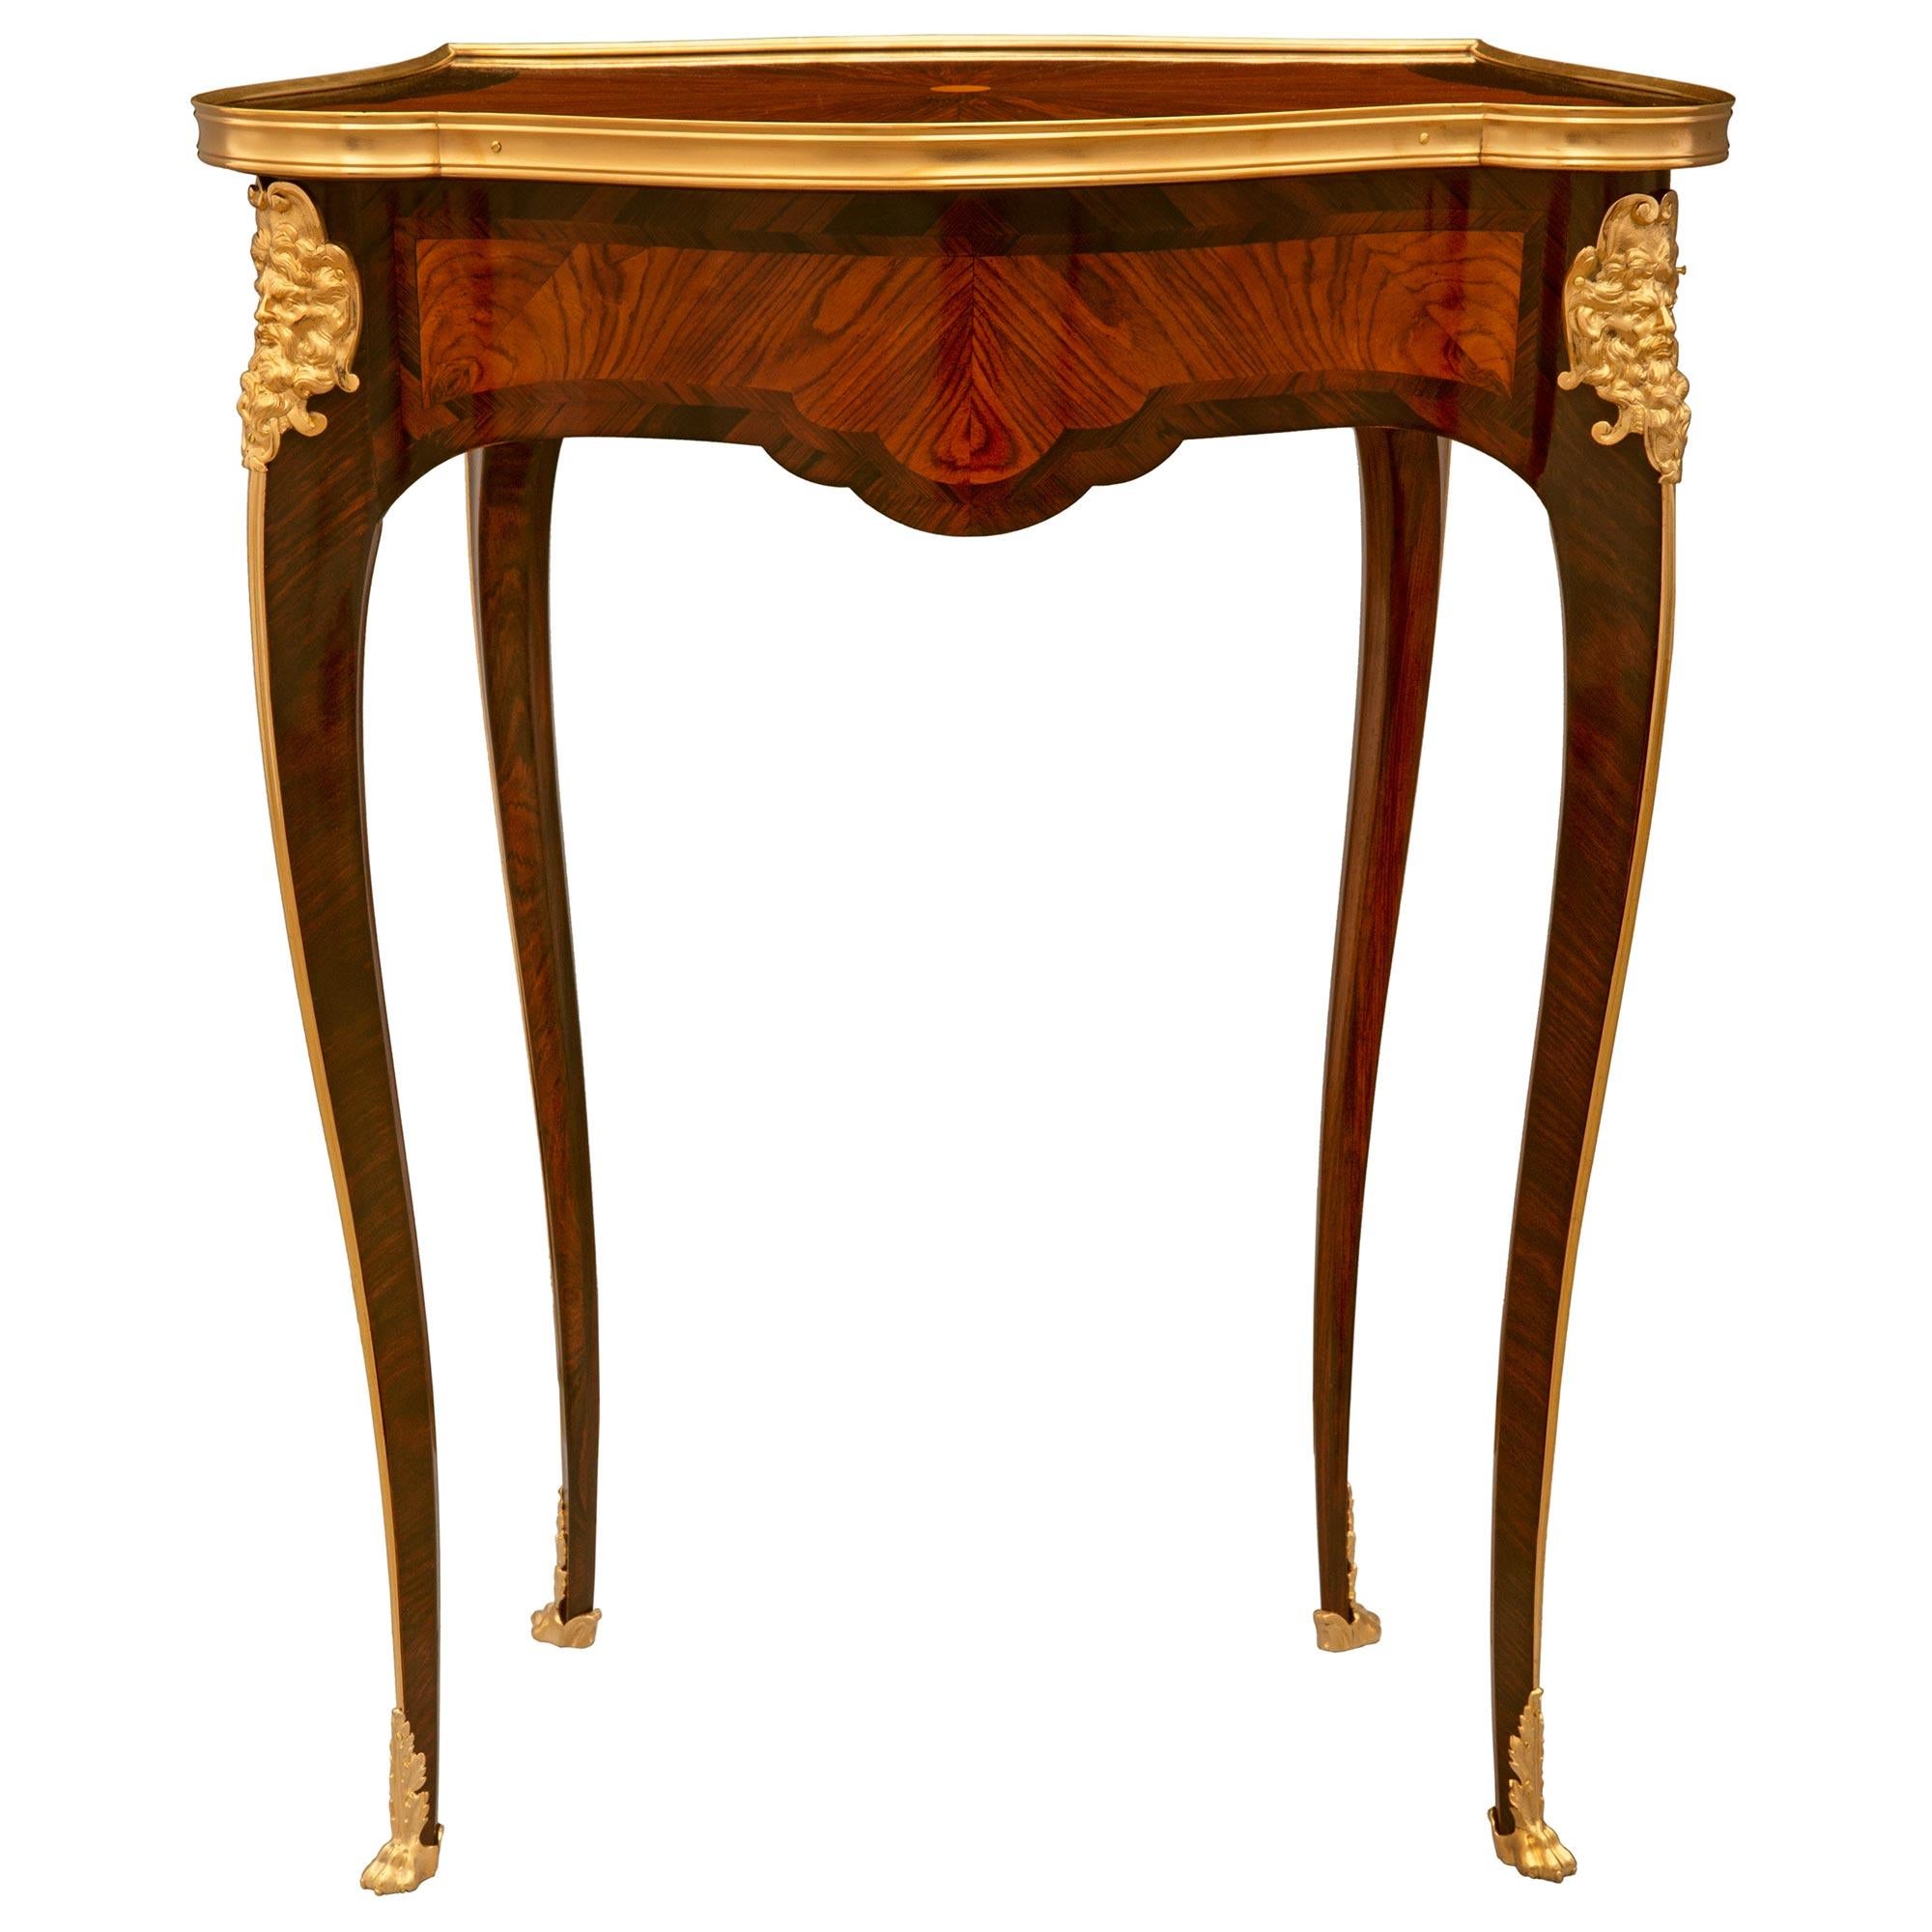 French 19th Century Belle Epoque Period Tulipwood, Kingwood & Ormolu Side Table For Sale 2